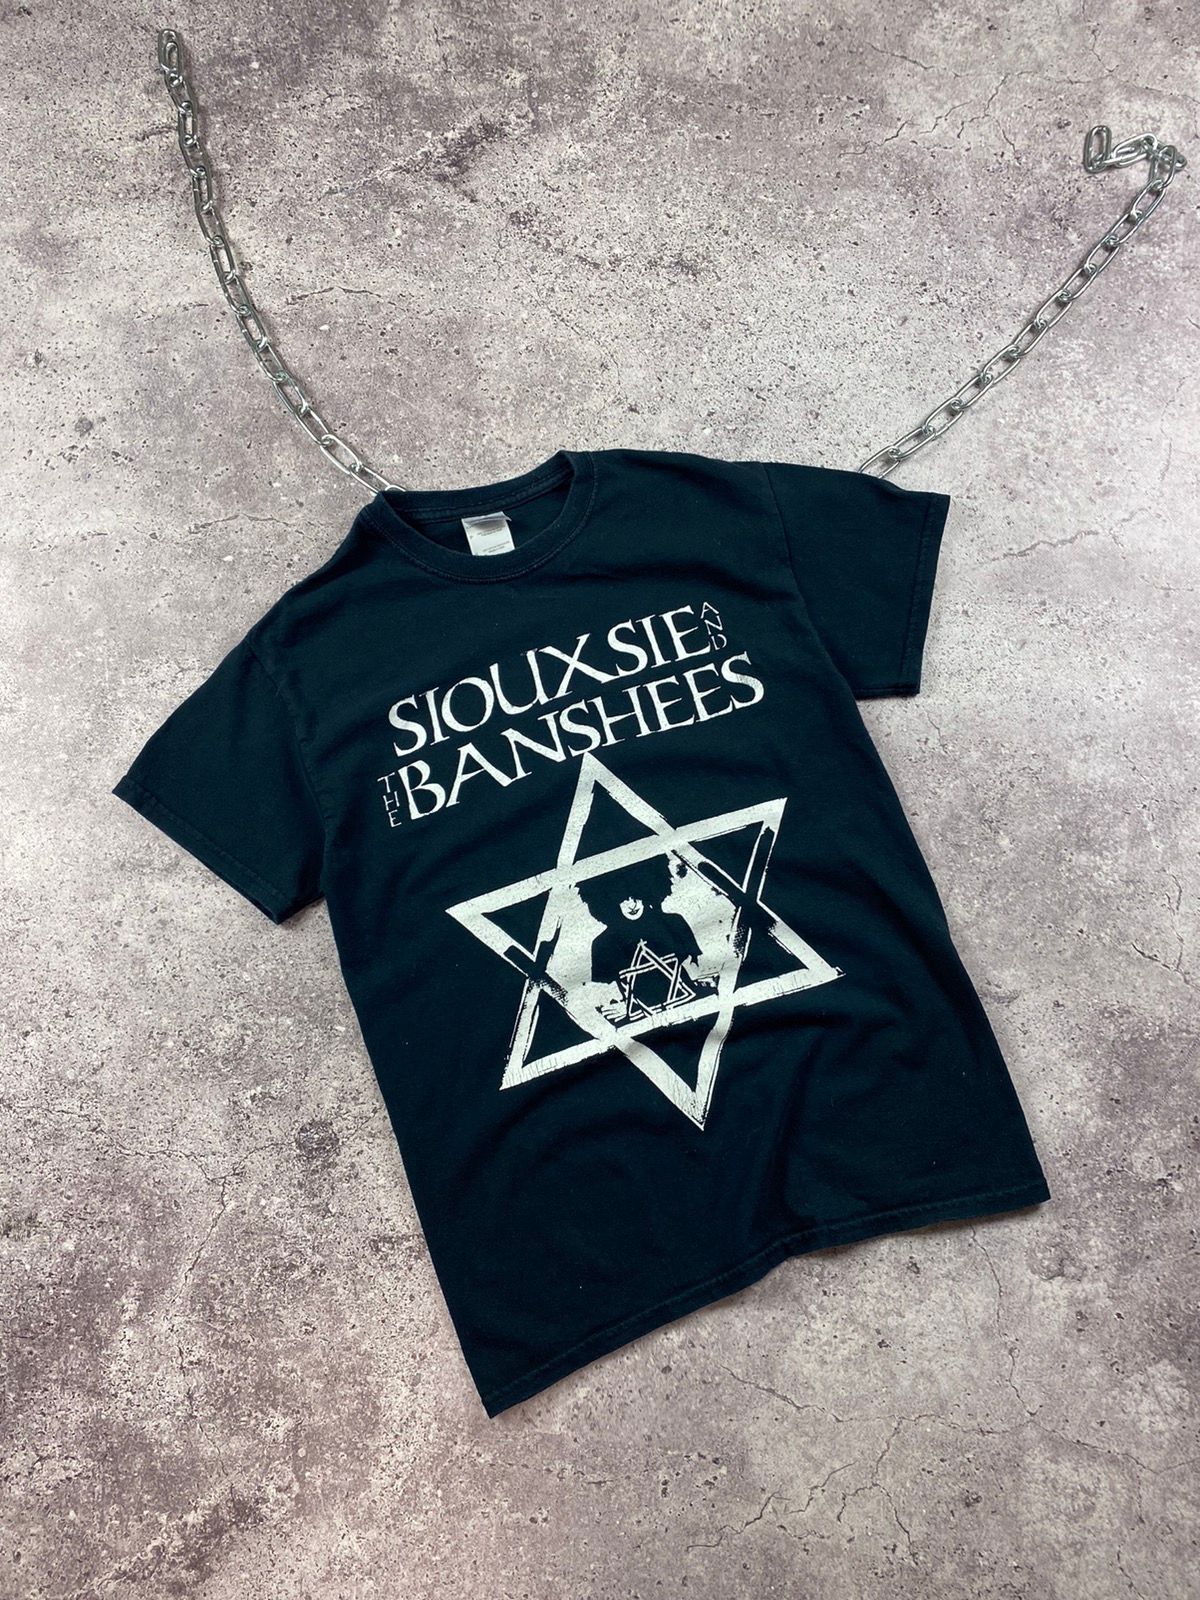 Vintage Vintage Siouxsie And The Banshees Tee Shirt Punk Faded Size US S / EU 44-46 / 1 - 1 Preview